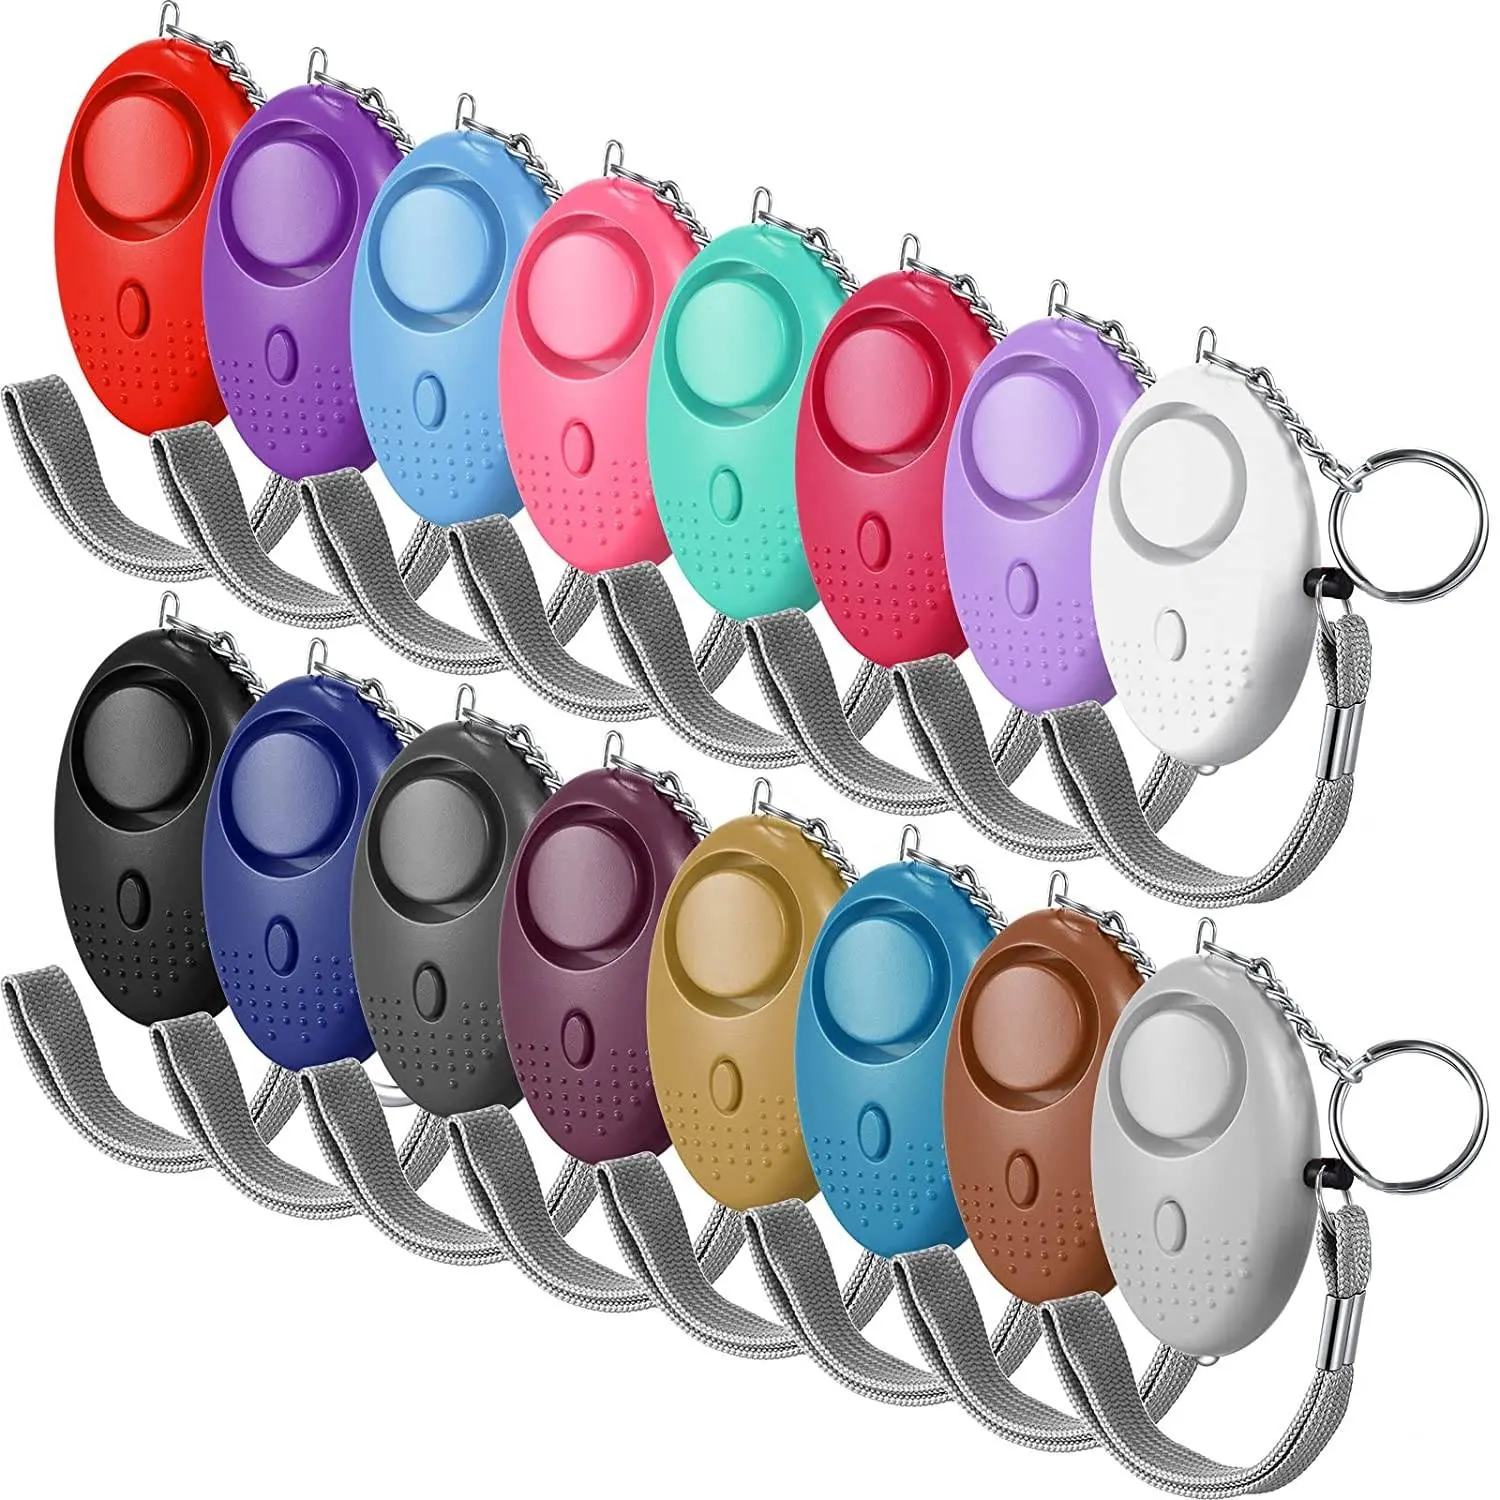 Wholesale LED Torch Attack Emergency Self Defense Keychain Set New Self Defense Safety Keychain Personal alarms